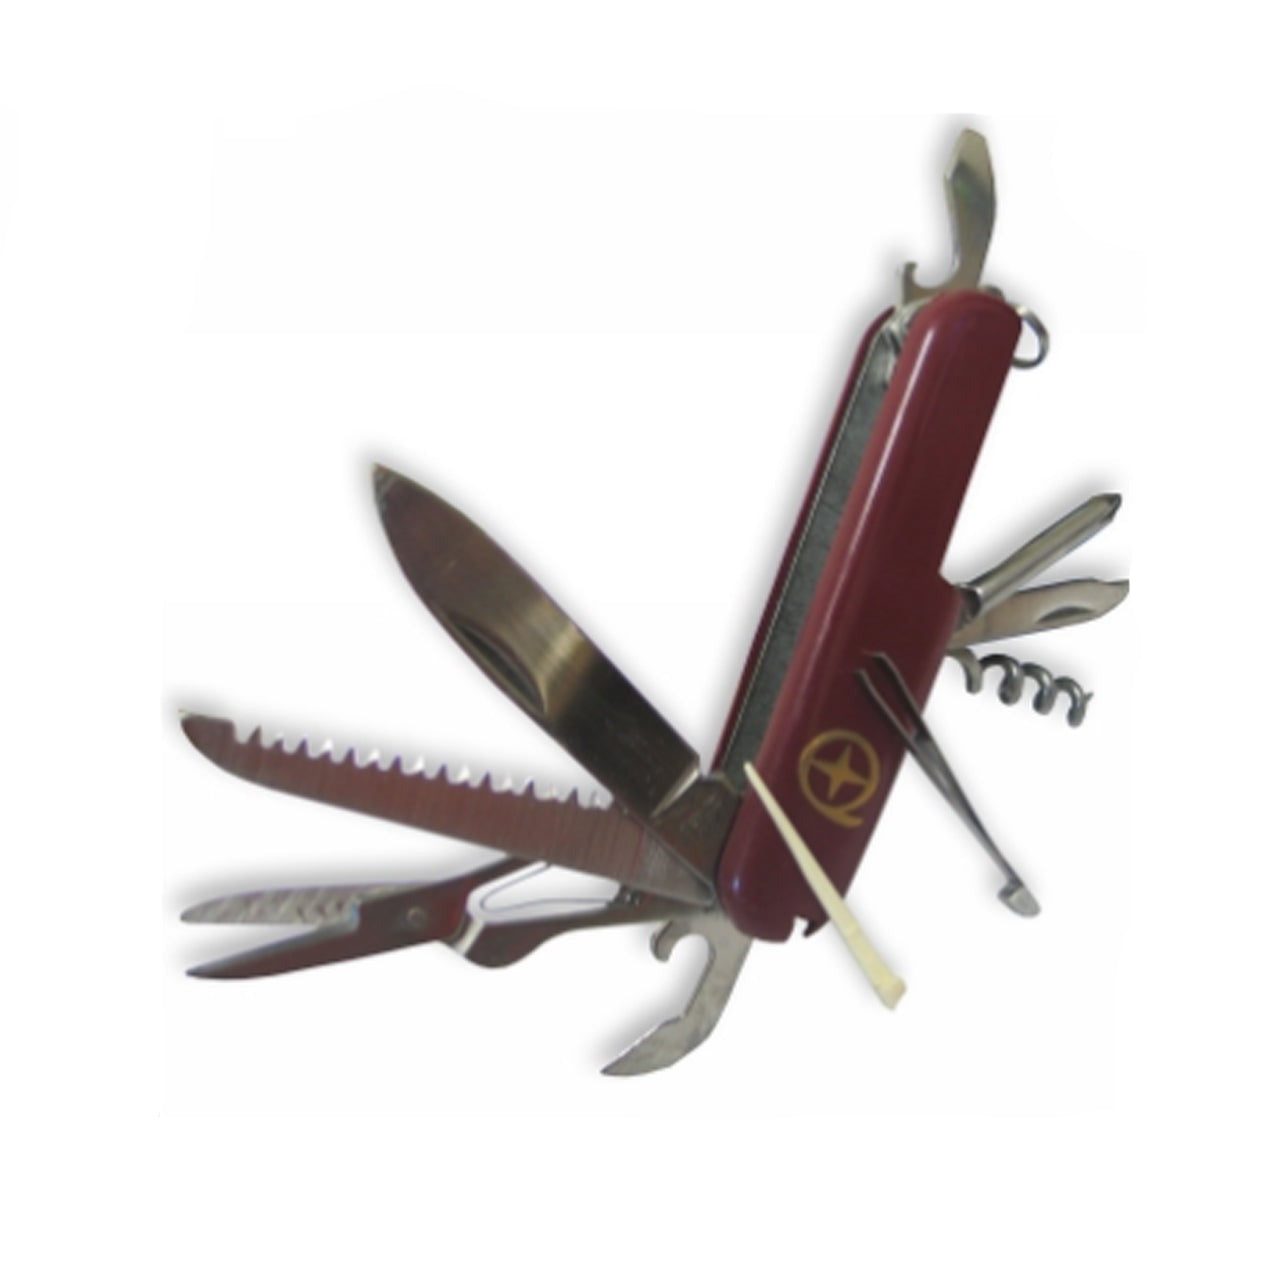 Bring your everyday essentials with you everywhere using the ultra-versatile 10 Function Swiss Army Knife! Featuring a large blade, saw, scissors, bottle opener, toothpick, tweezers, corkscrew, nail file, screwdriver and flathead screwdriver, www.moralepatches.com.au